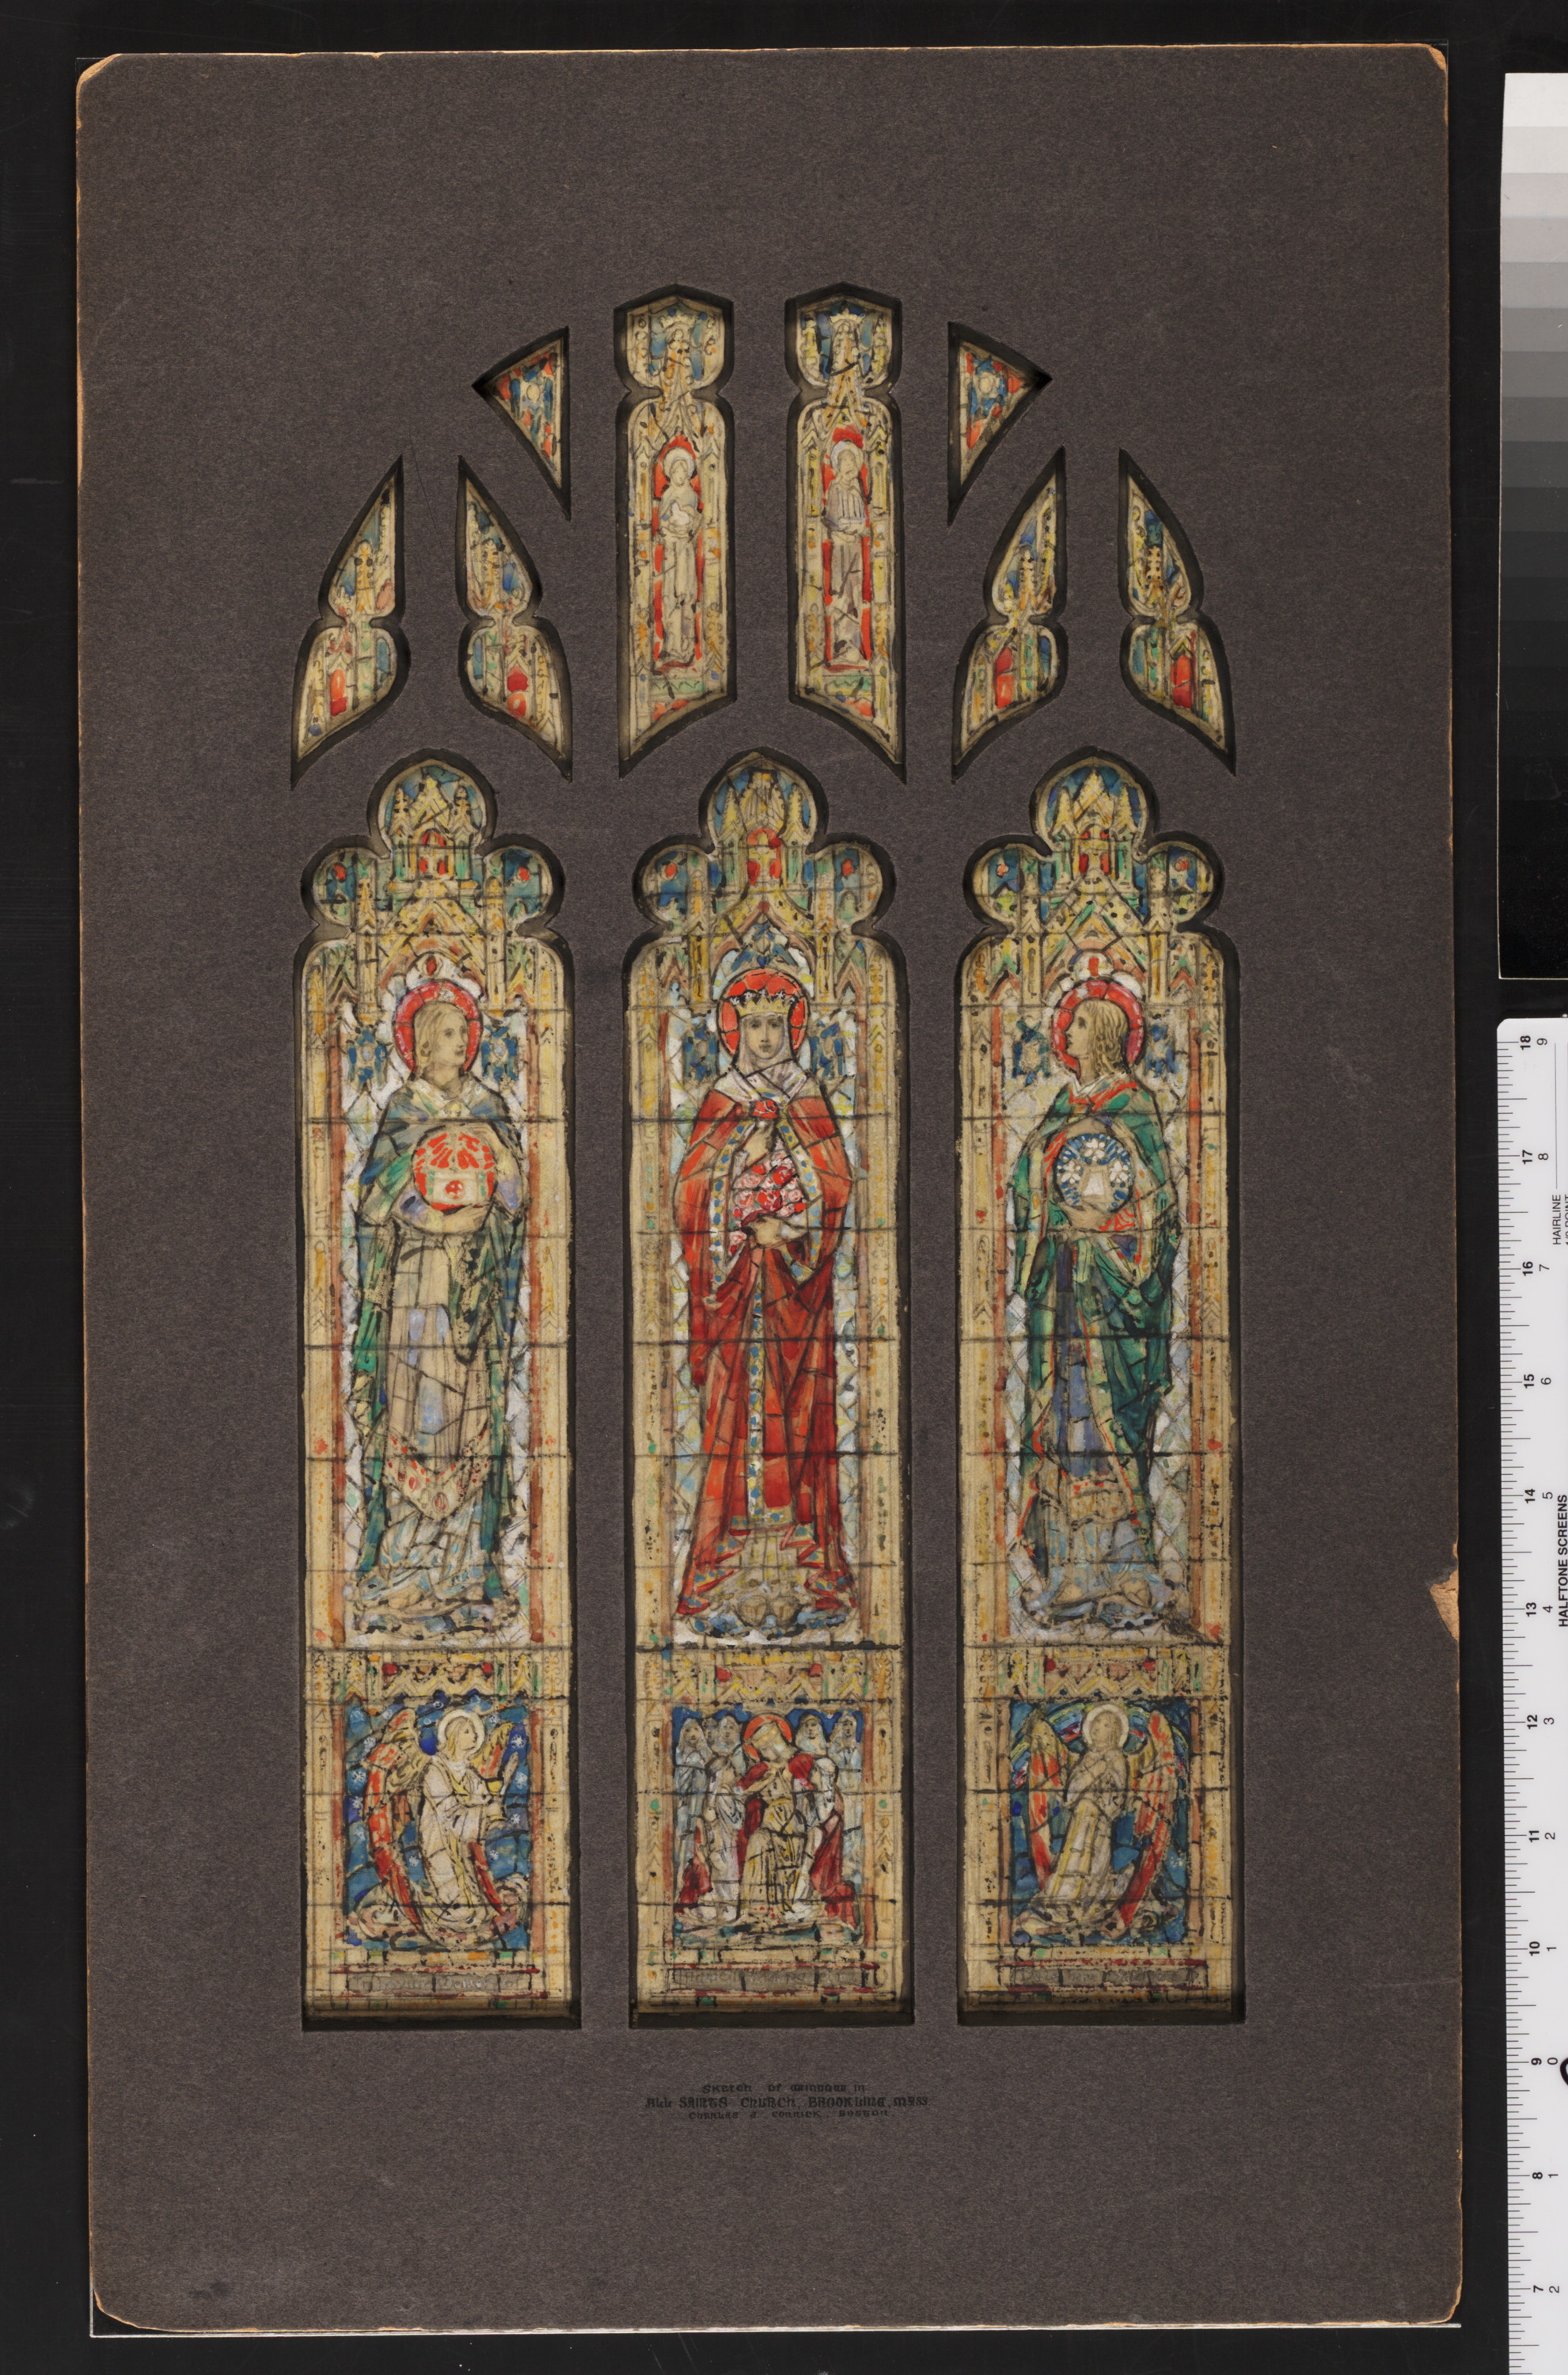 Design drawing for stained glass window showing Ascension bold with hand  of God light and architecture  Library of Congress